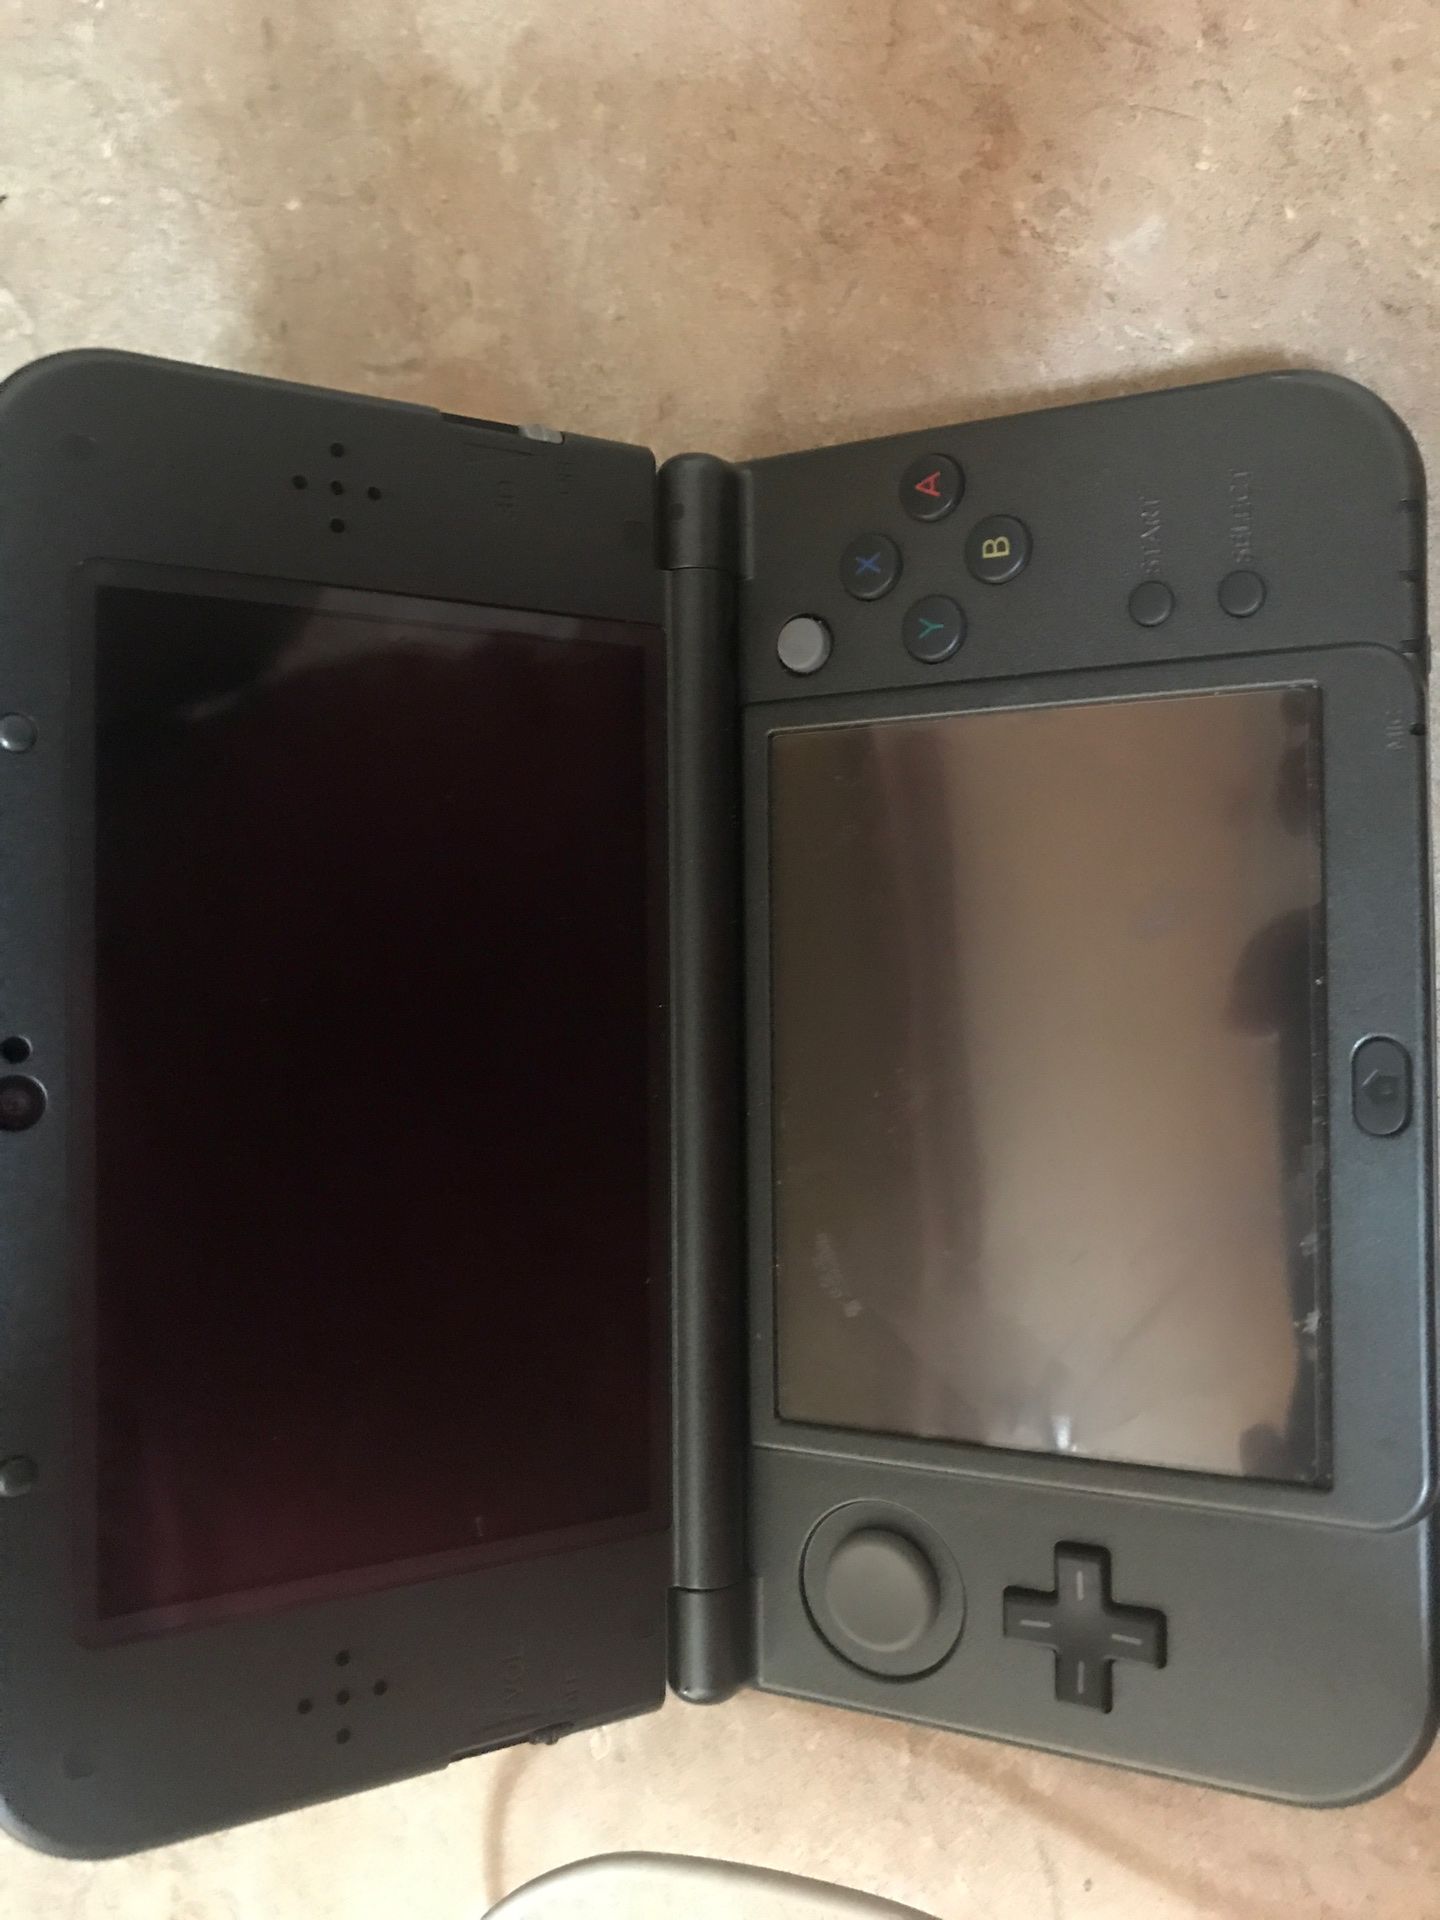 Nintendo 3DS XL with case and several games